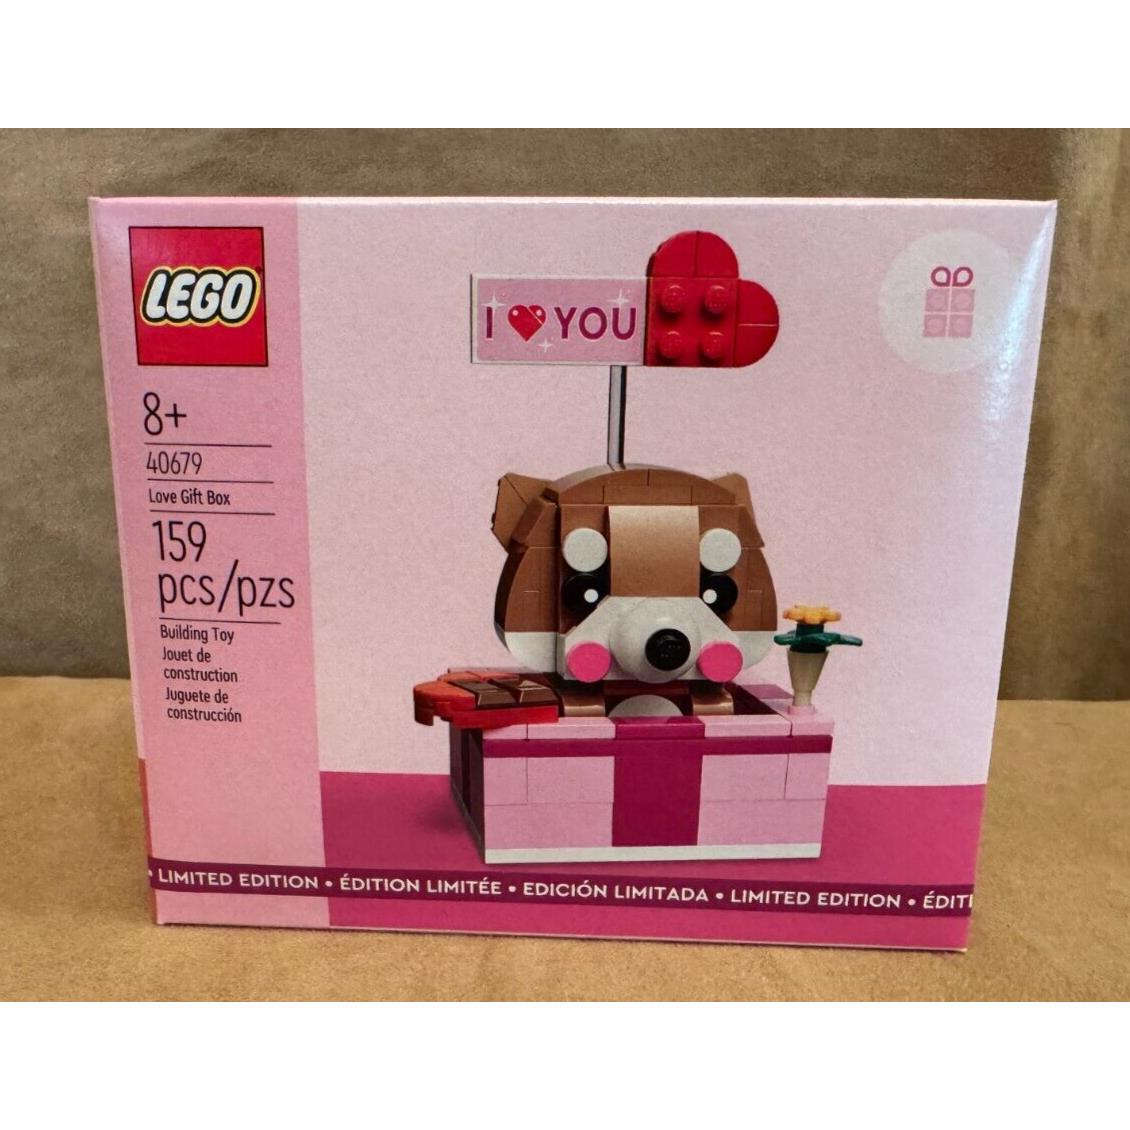 40679 Lego Valentine`s Love Gift Box Bear with Heart Limited Edition 159pcs